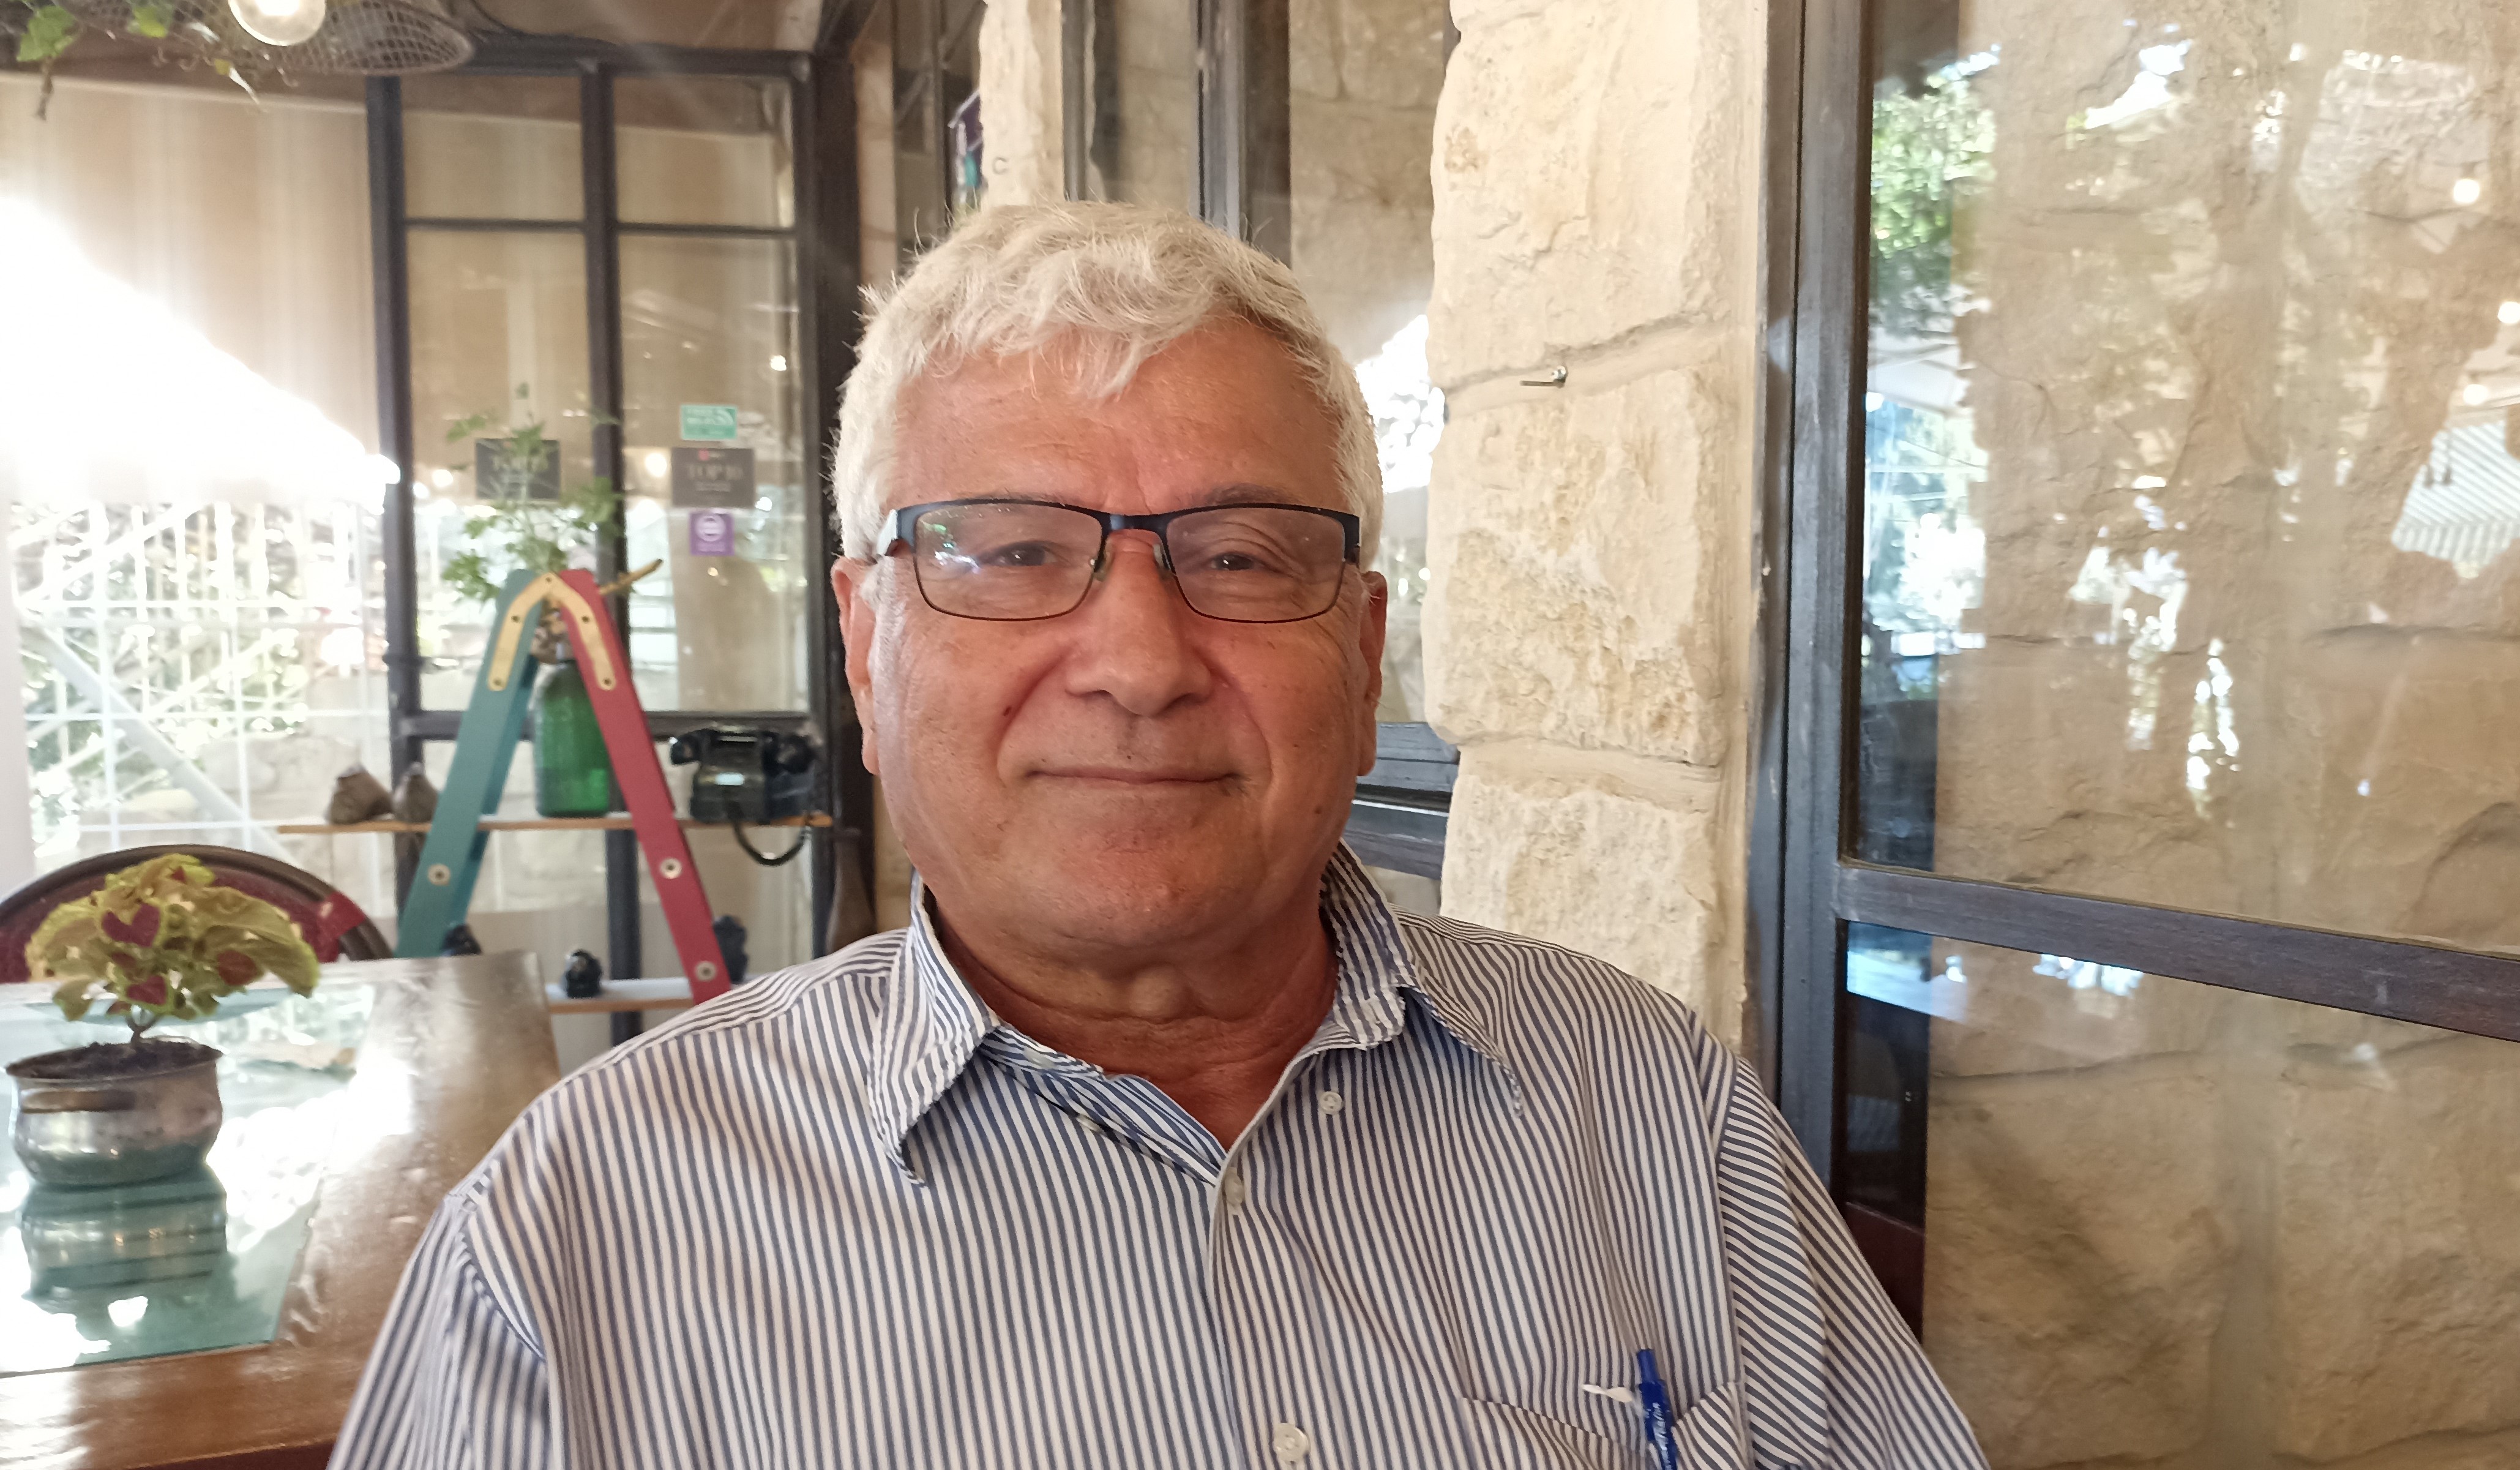 "There are powerful forces in Israeli society that are healthy – it's not all far-right and settlers. There are still many people who want a different future for Israel, and realise that if this house burns down, it will do so on all of us," says Abu-Rass.